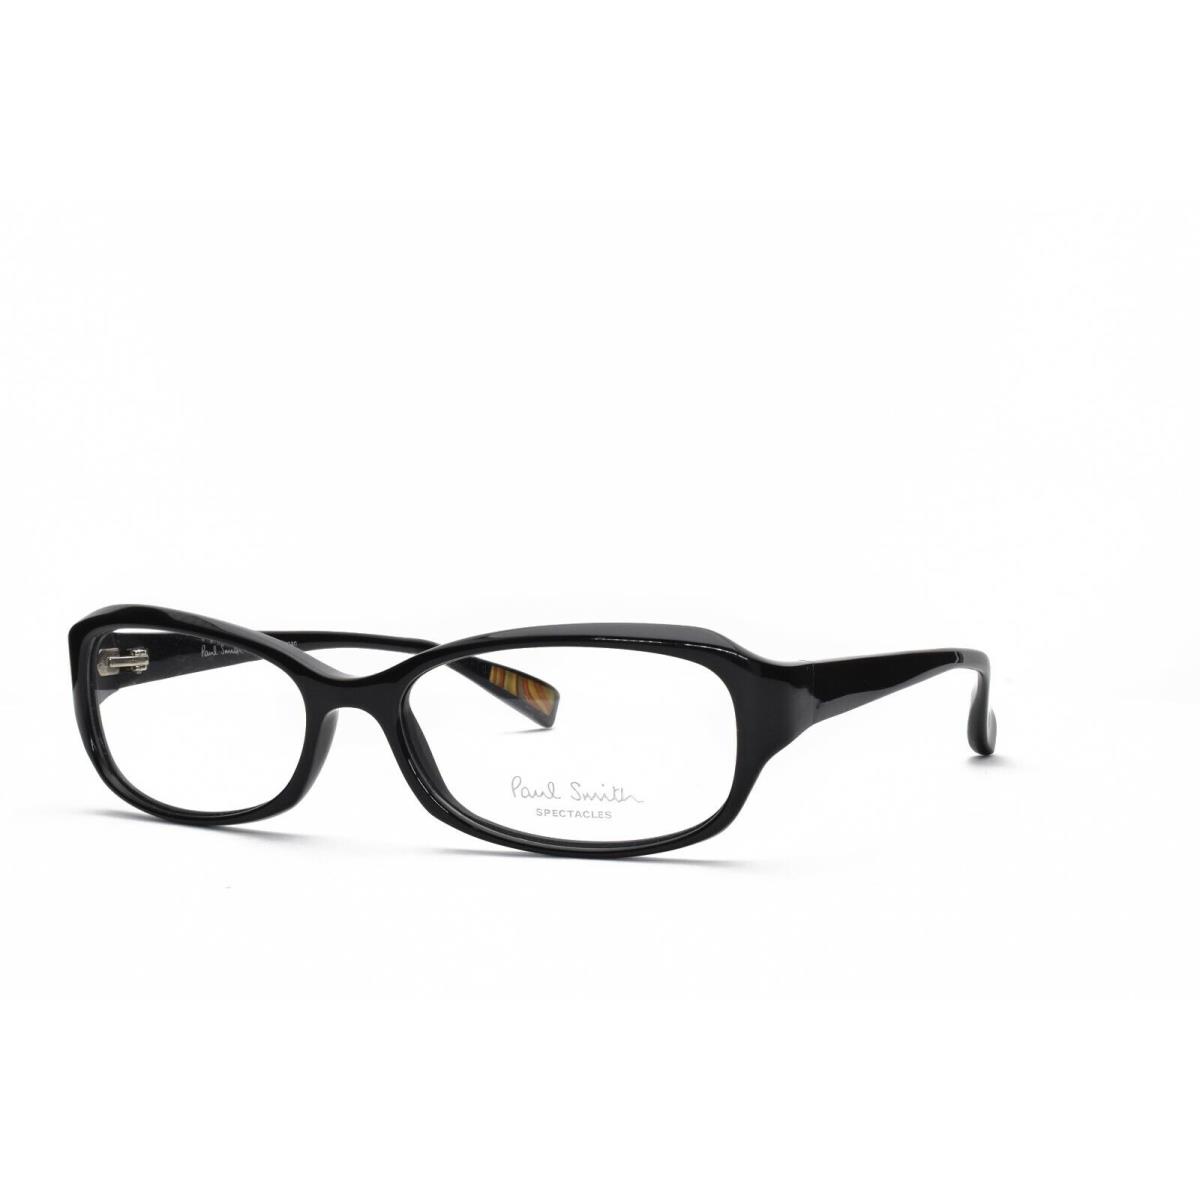 Paul Smith PS 289 OX Eyeglasses Frames Only 53-17-130